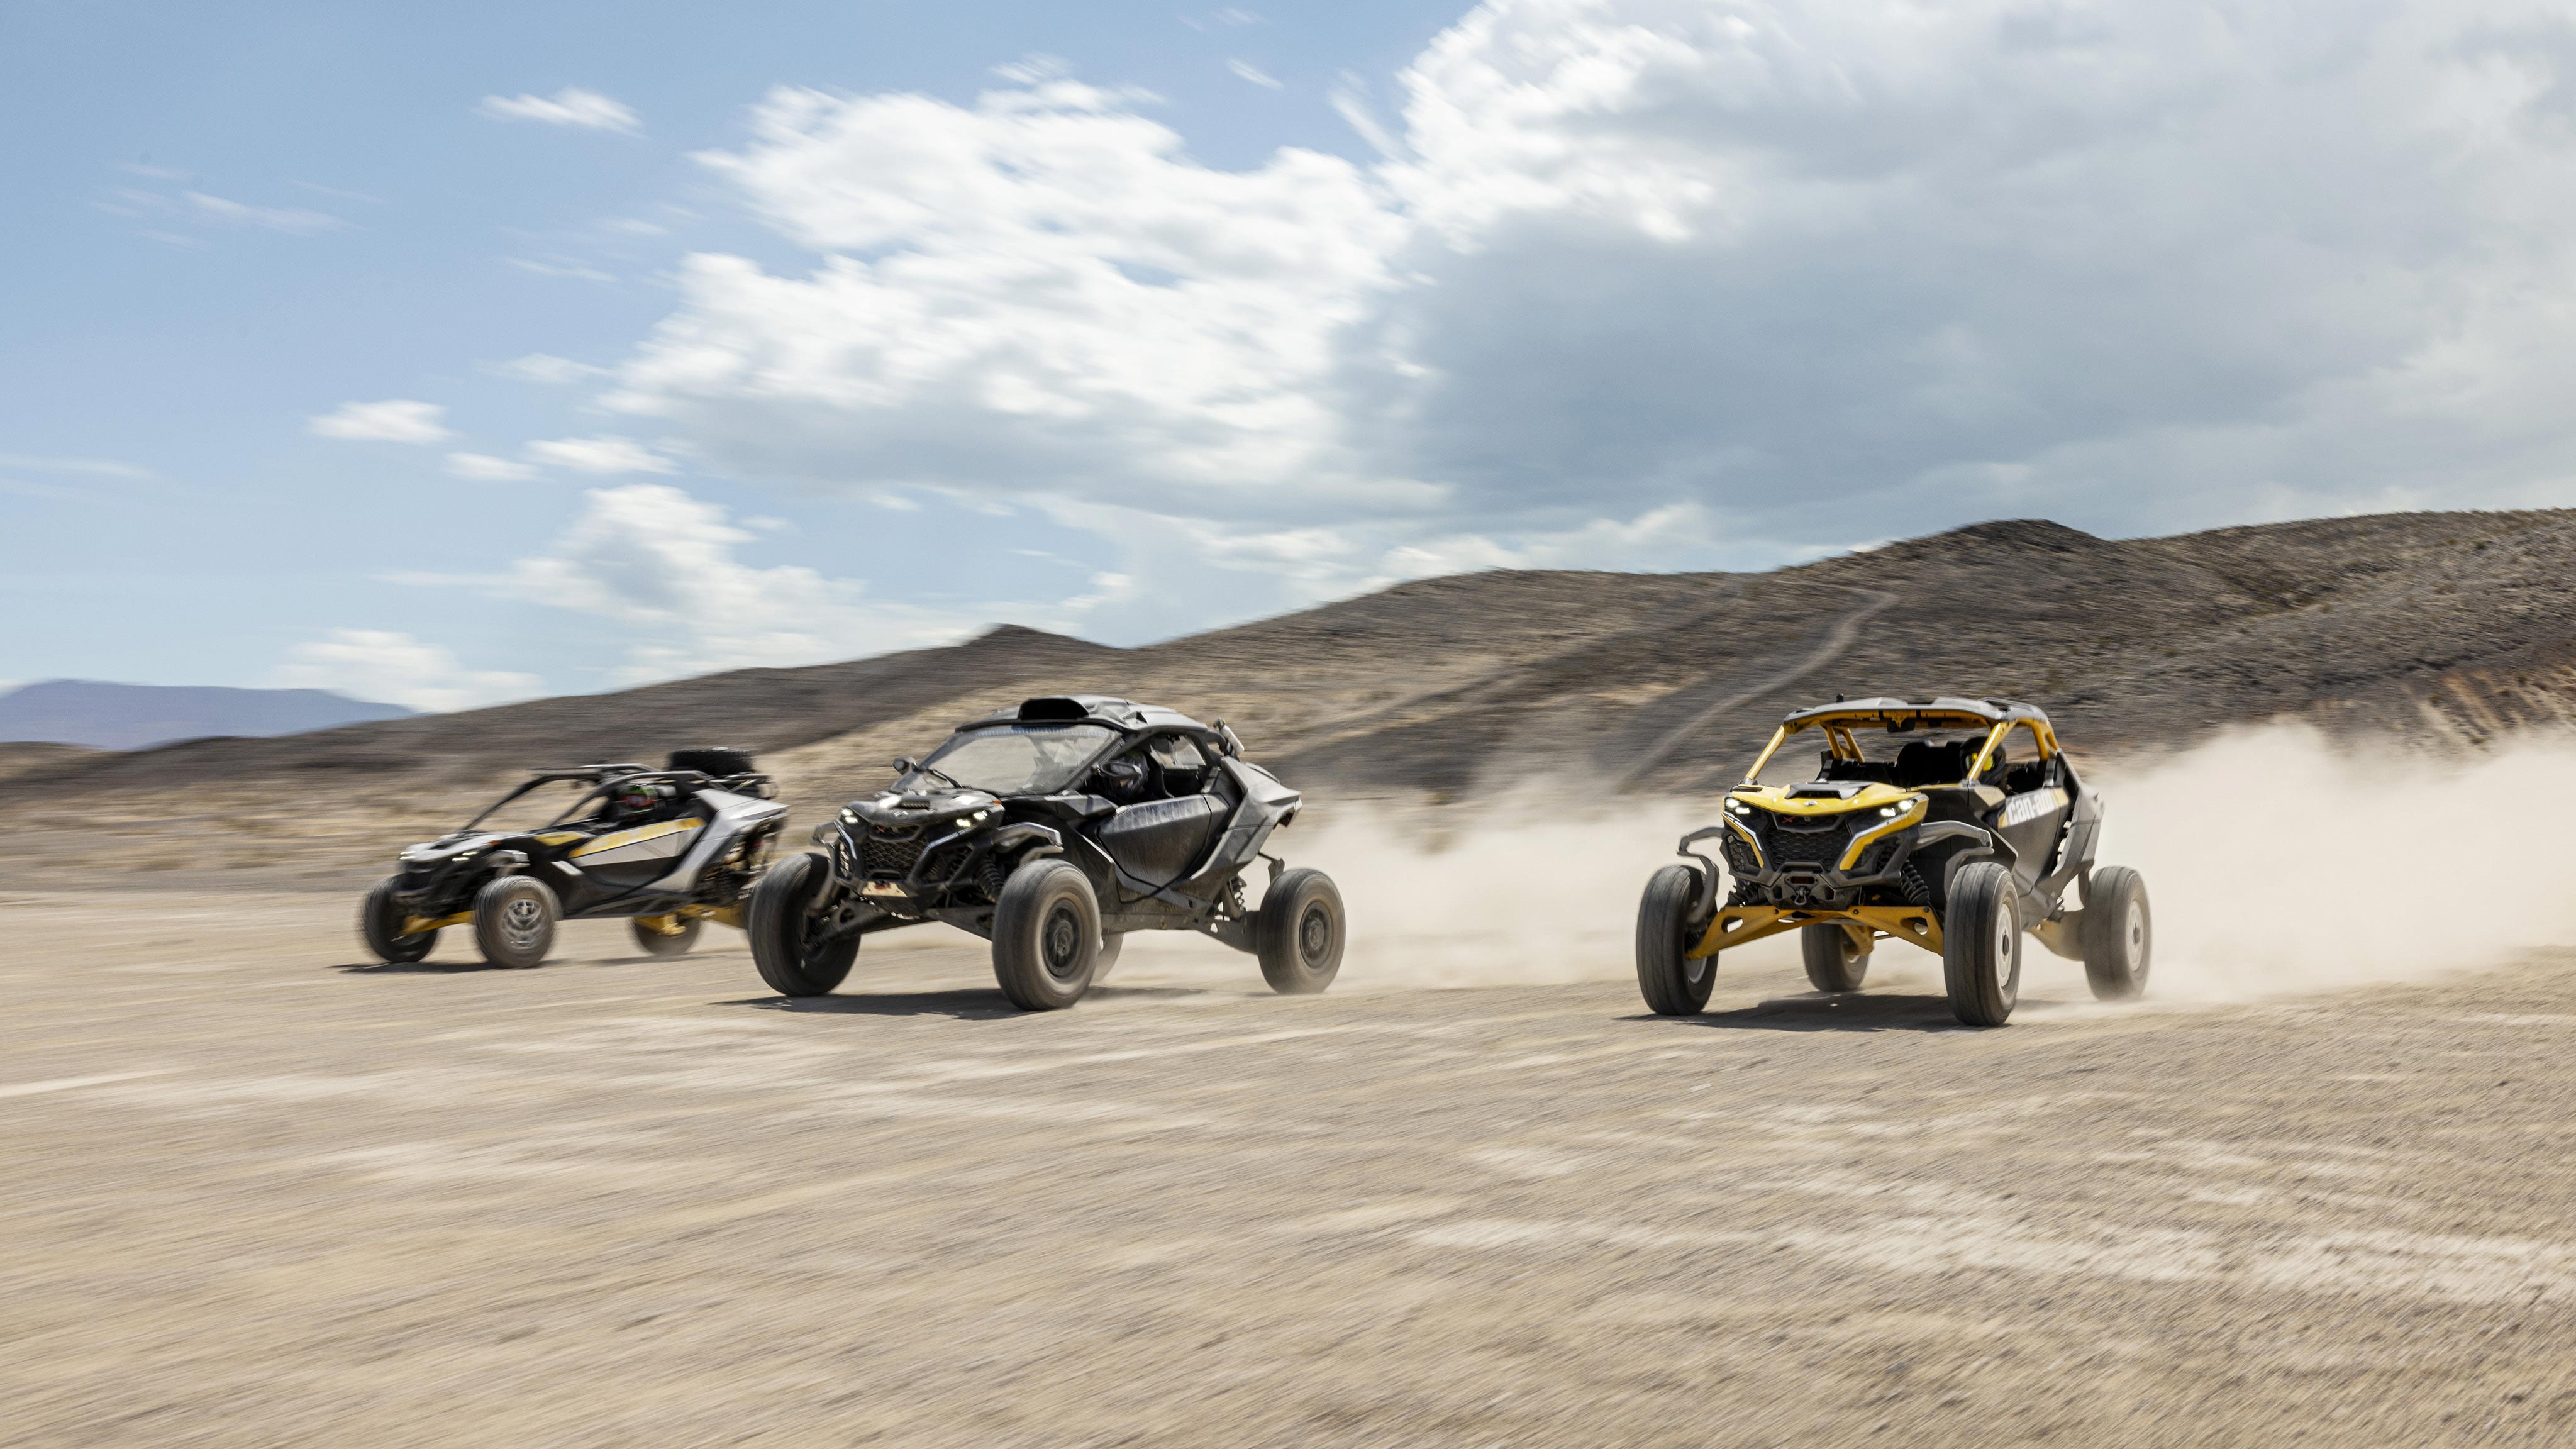 A trio of Can-Am SxS vehicles racing through the desert